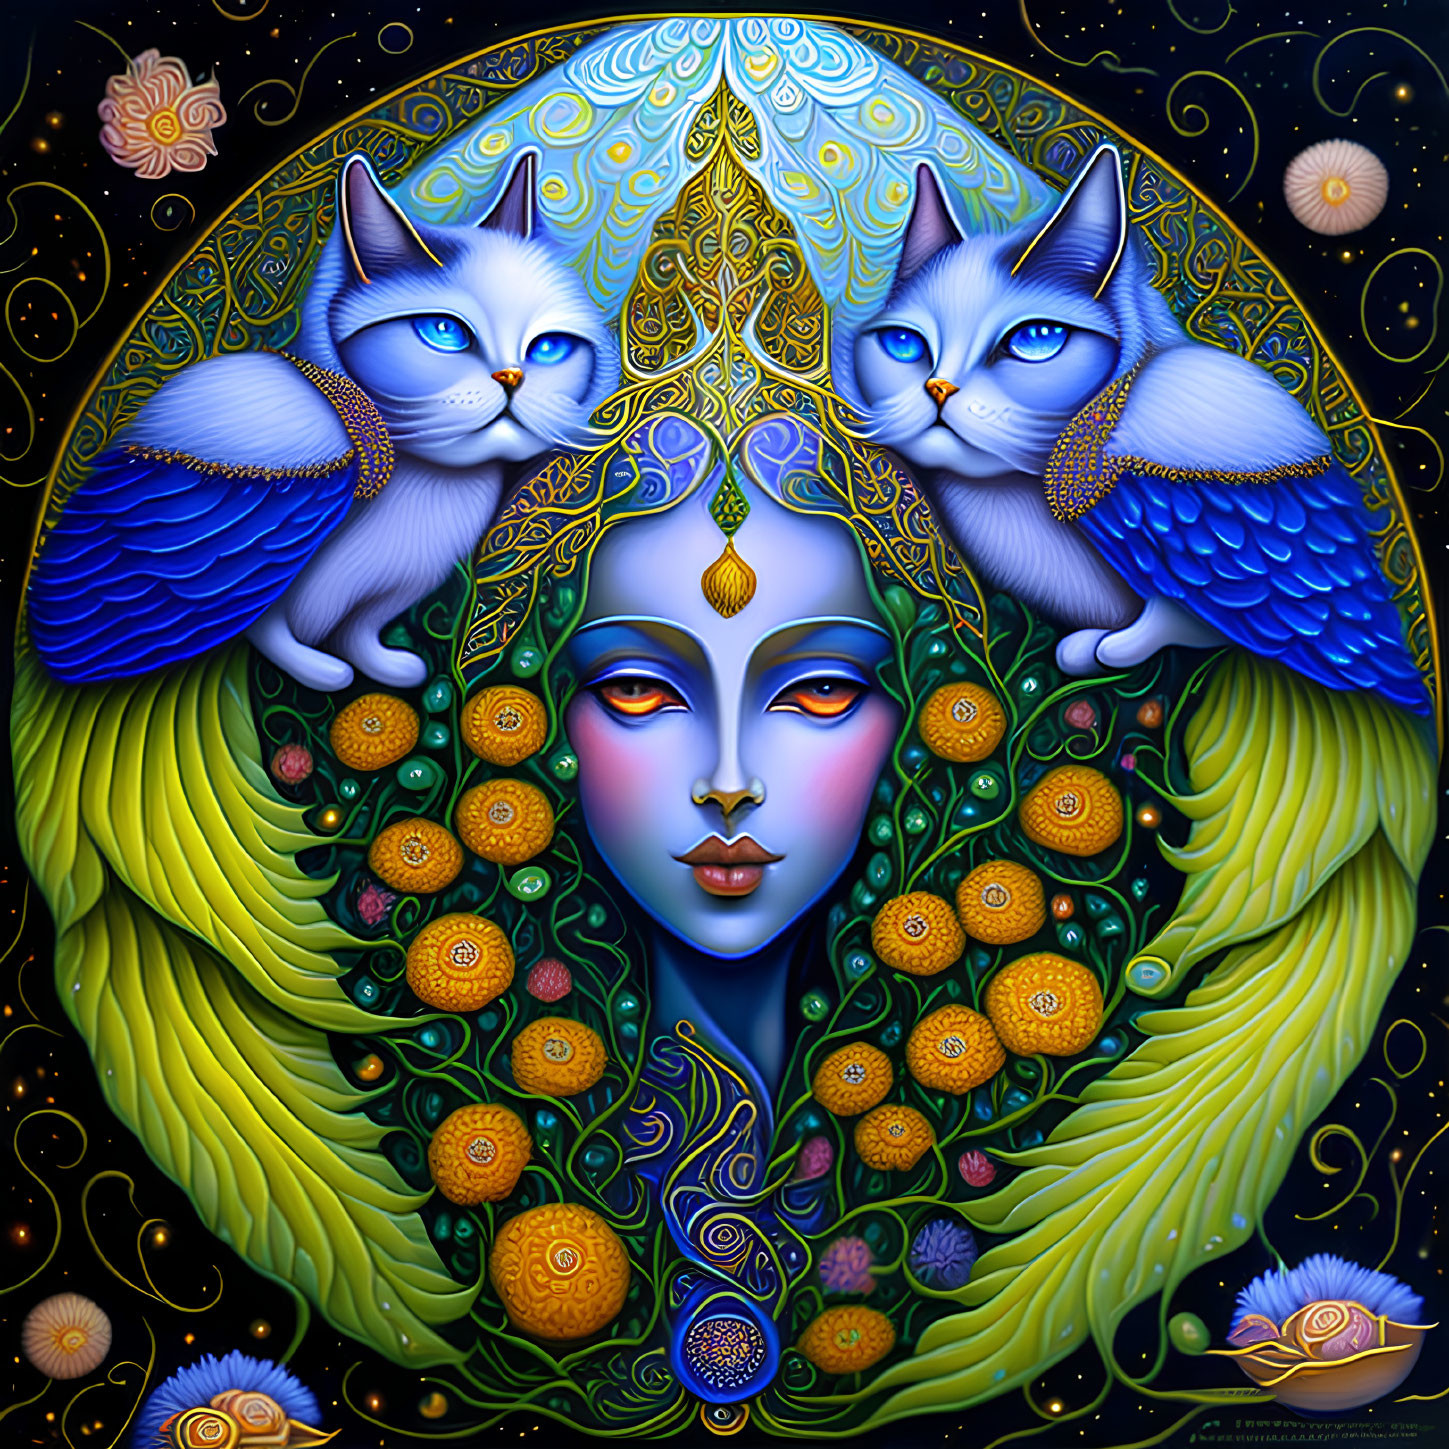 Colorful artwork: Blue-skinned woman, winged cats, intricate patterns, and floral elements on